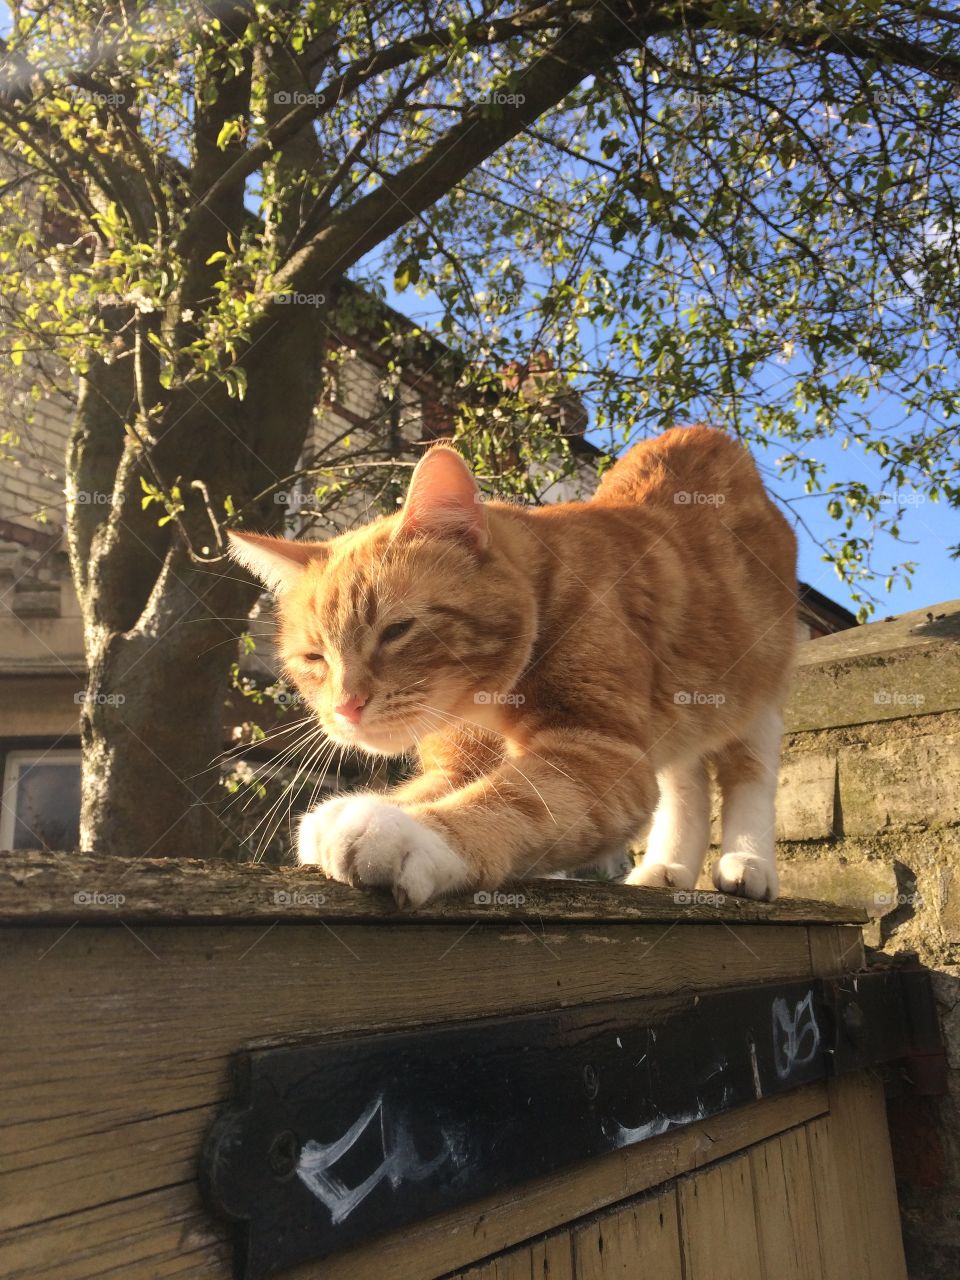 Ginger cat in the sunshine on a wooden fence